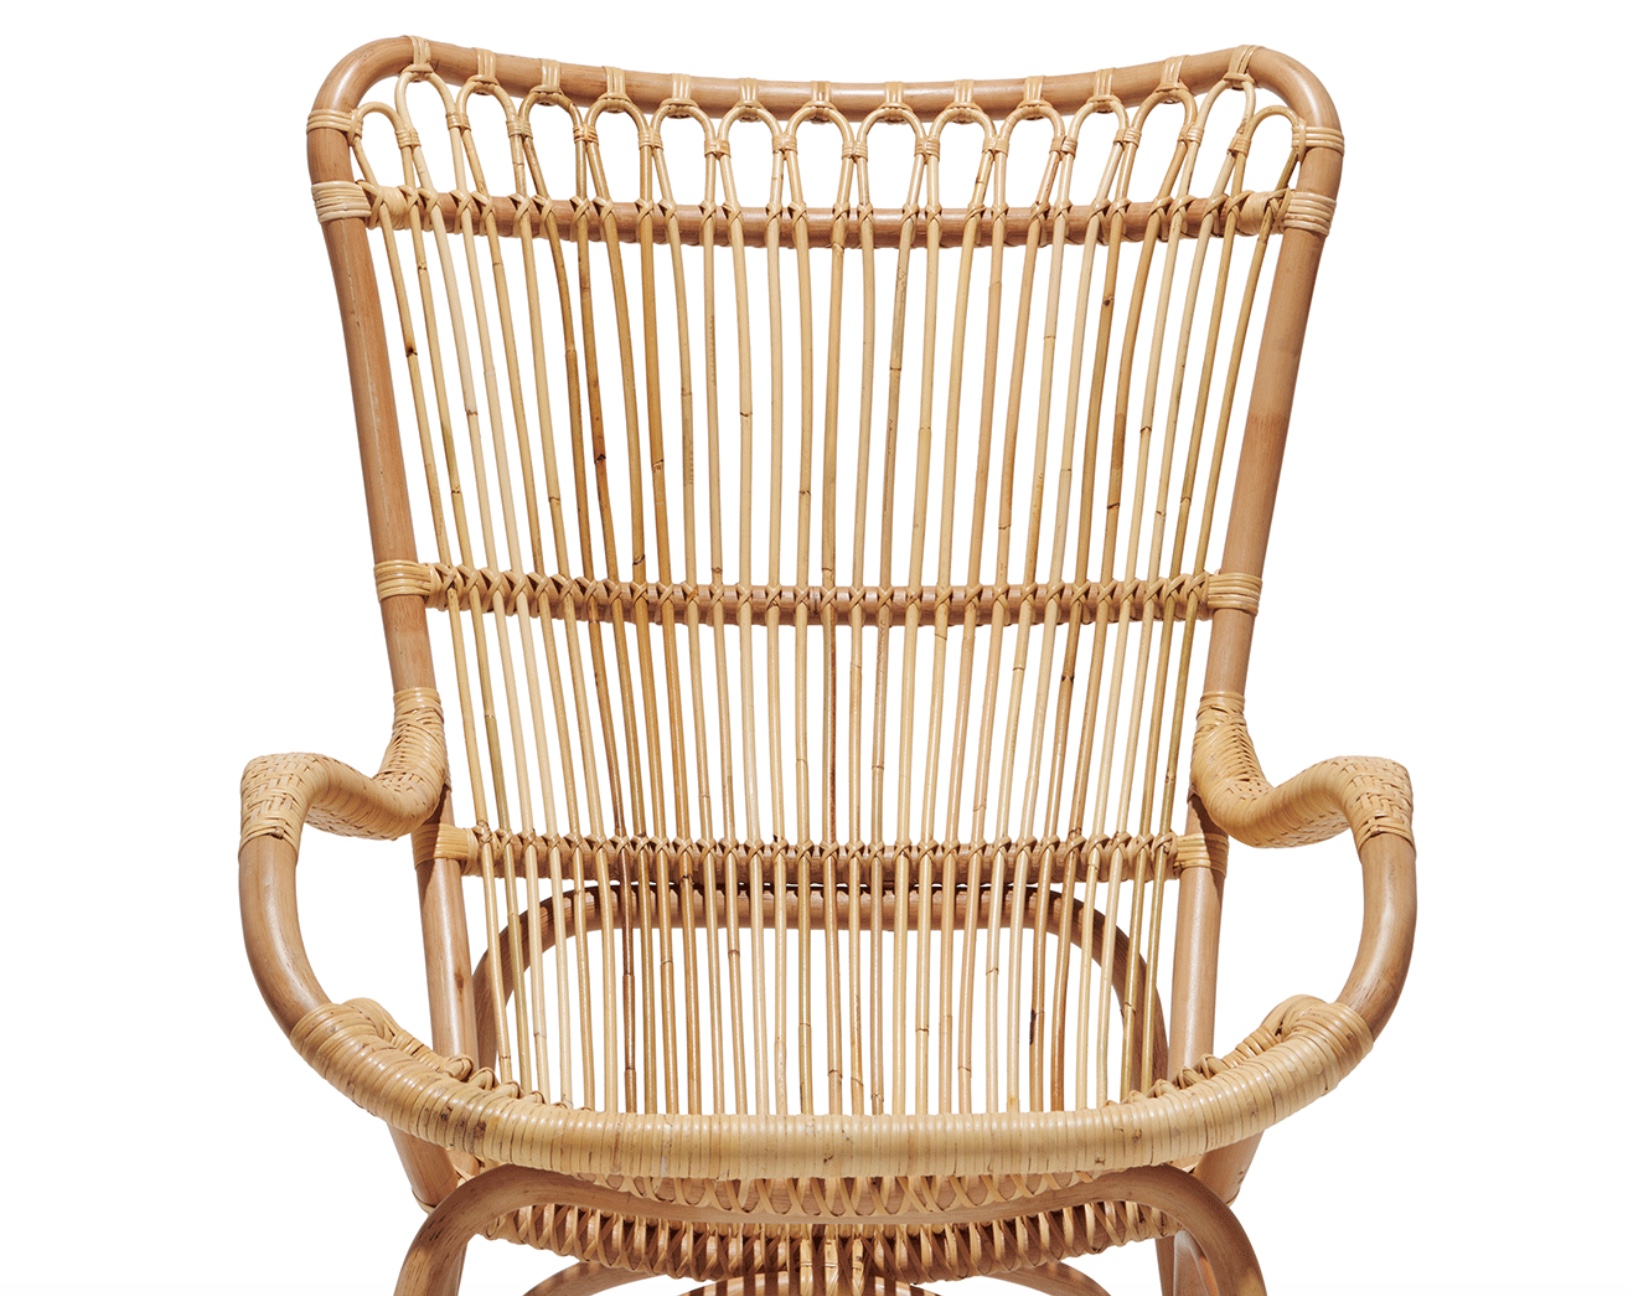 Monaco Collection by Industry West Monet Chair in rattan